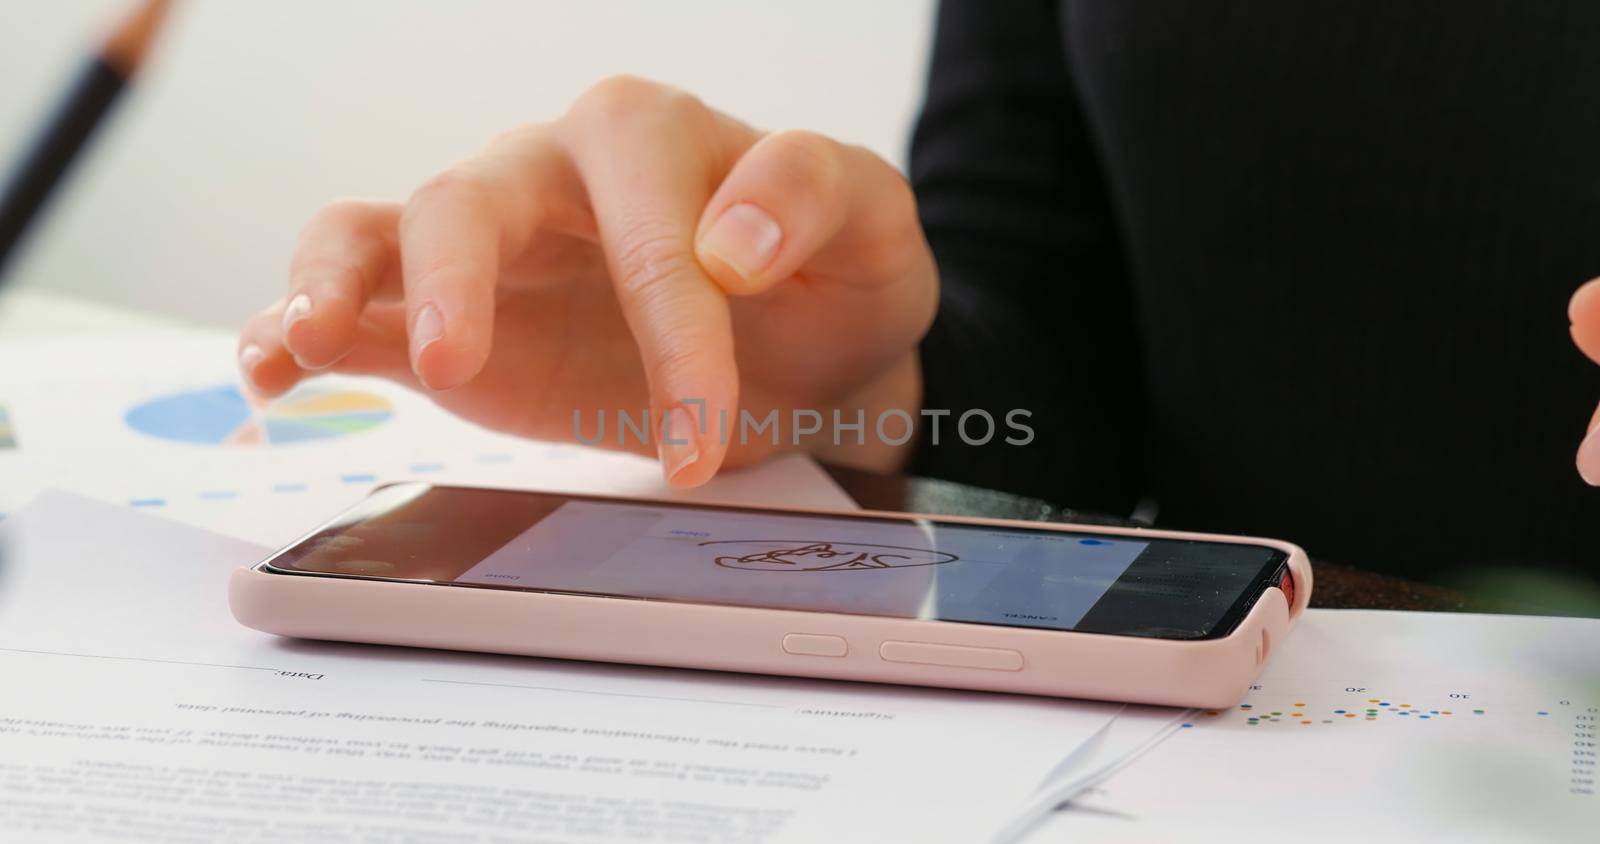 Digital Signature on smartphone screen with woman hand. Sign Document of Deal at Work in Office Indoors. Write Business Agreement for Entrepreneur. Contract electronic signature.